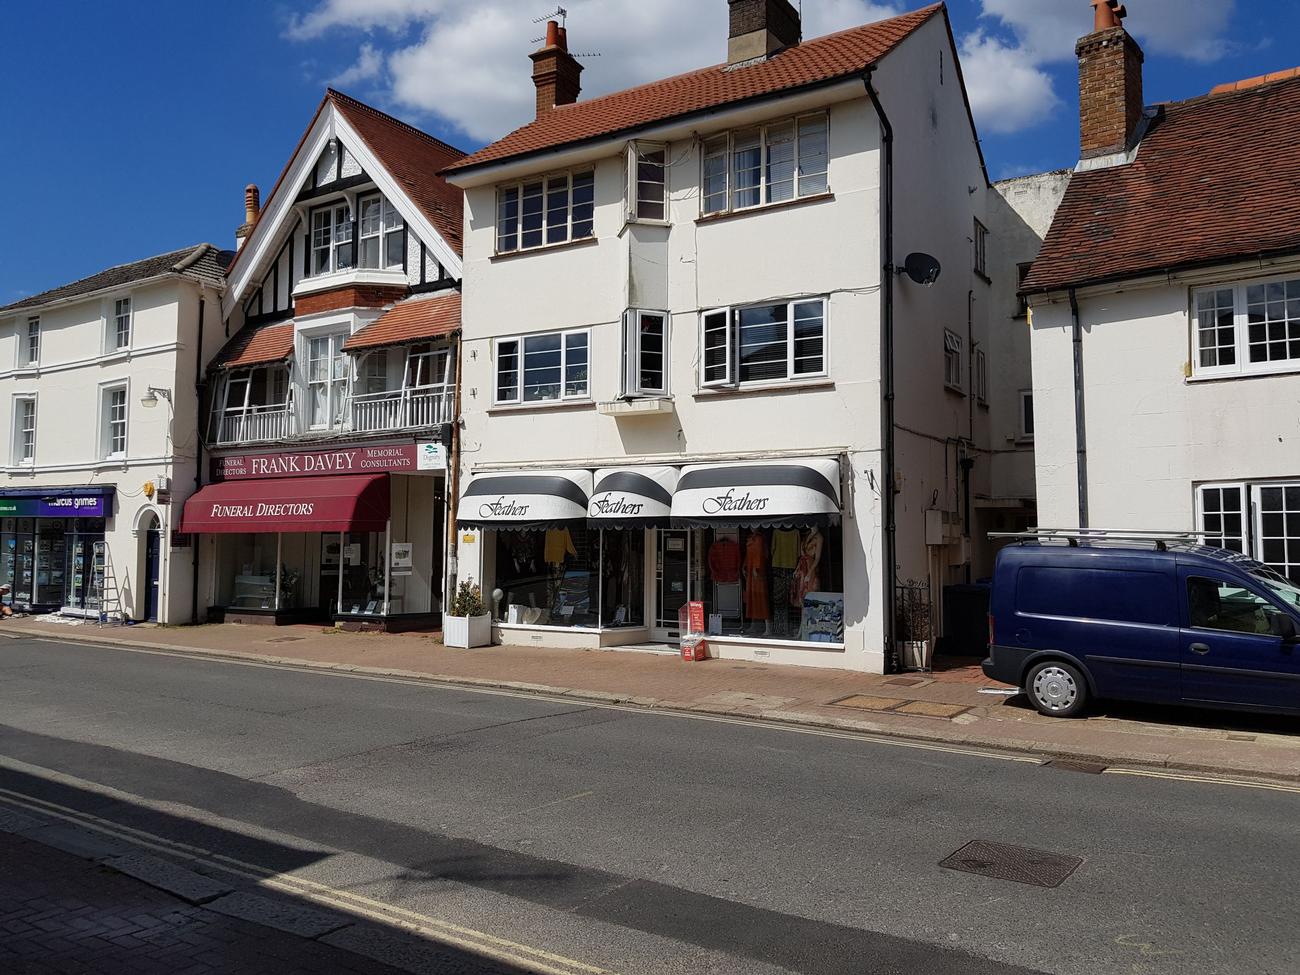 Gallery | Chartered Surveyor in Hurstpeirpoint and West Sussex gallery image 9